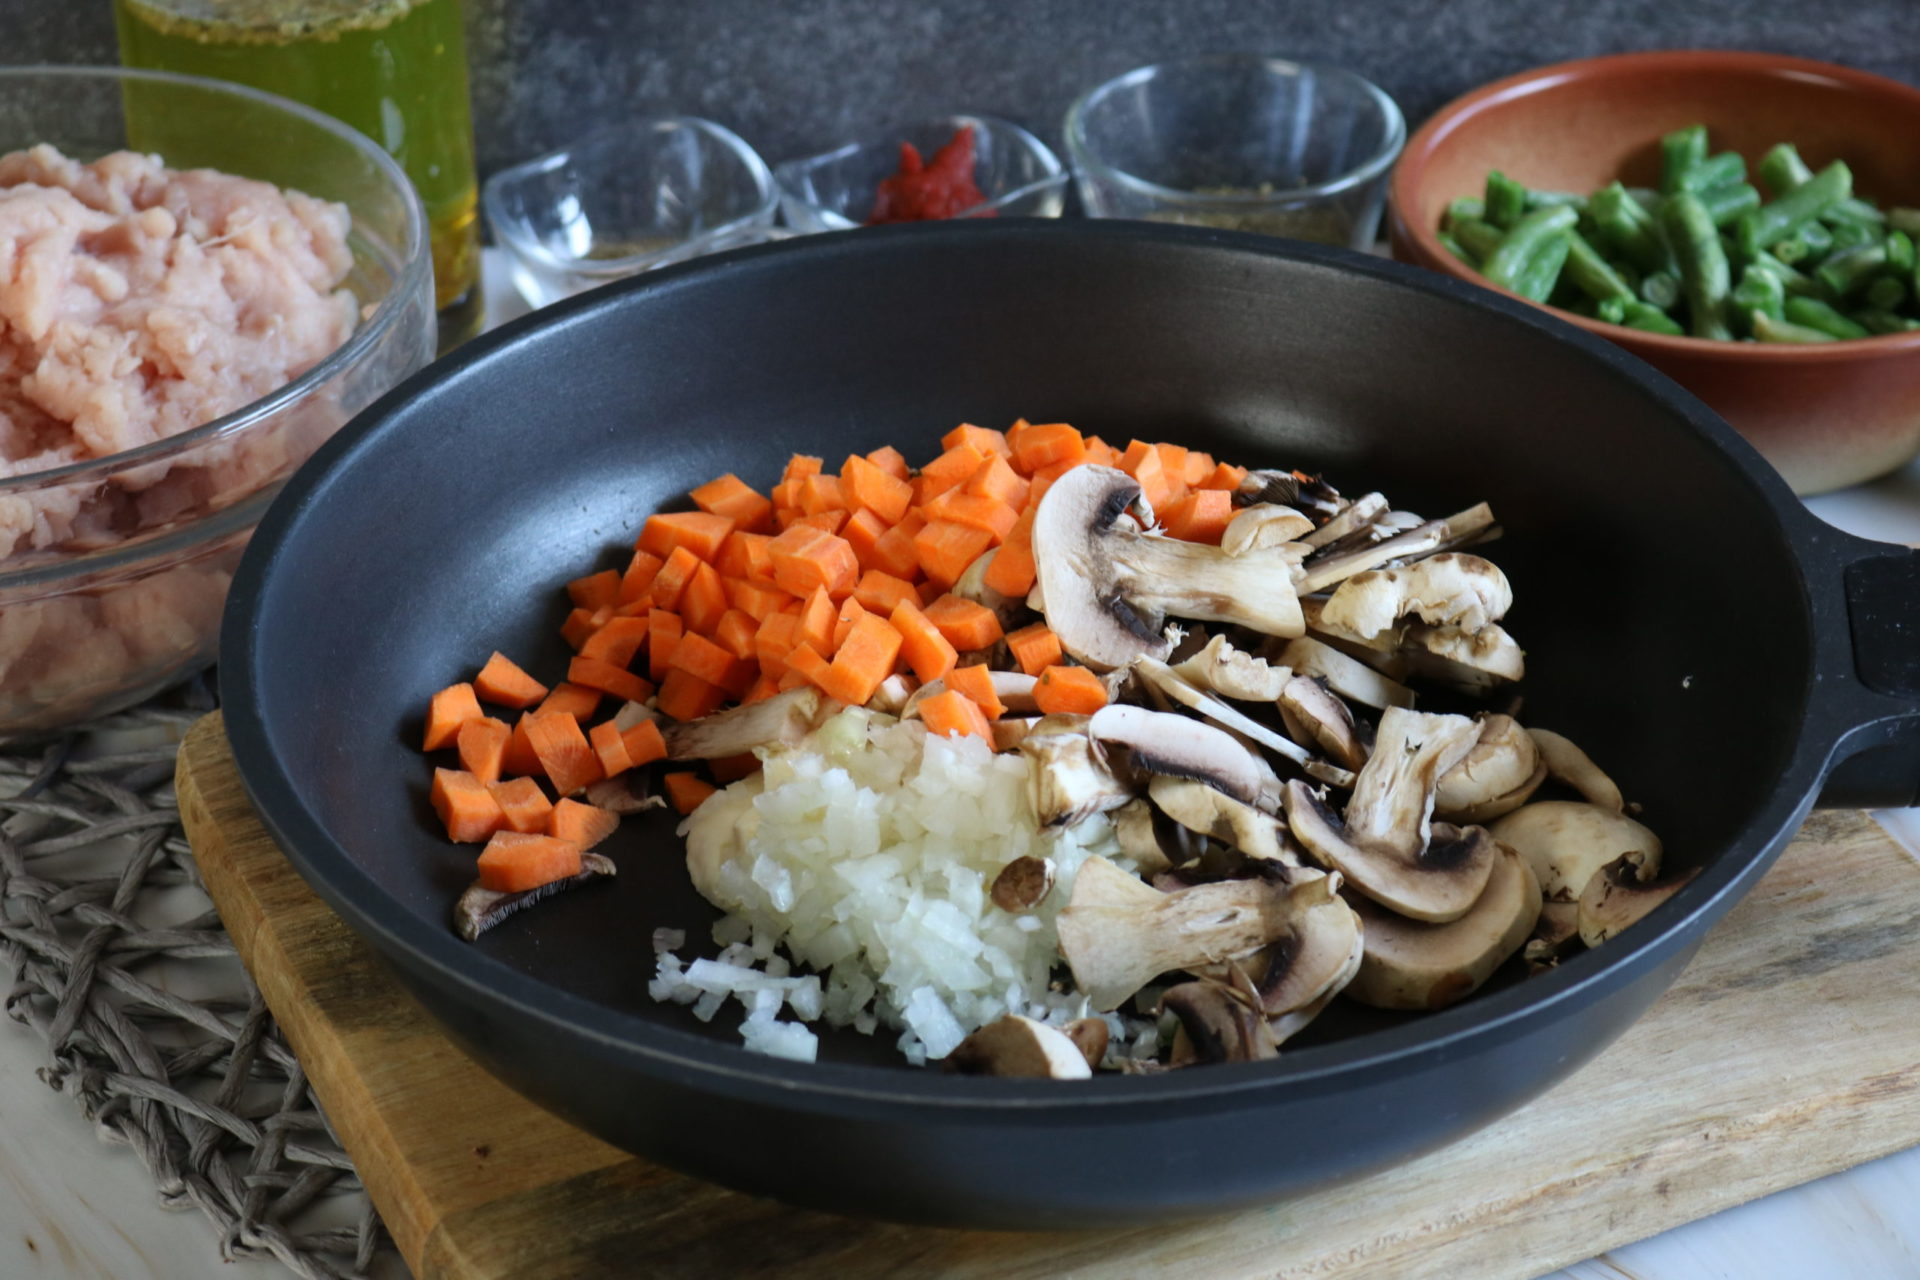 skillet with vegetables in it, ready to cook